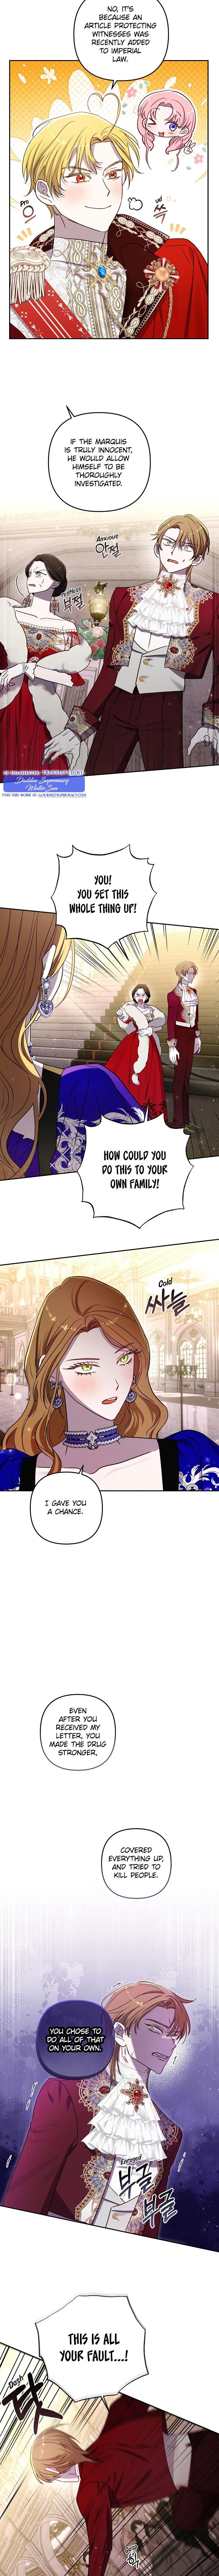 I am Afraid I have Failed to Divorce Chapter 67 page 5